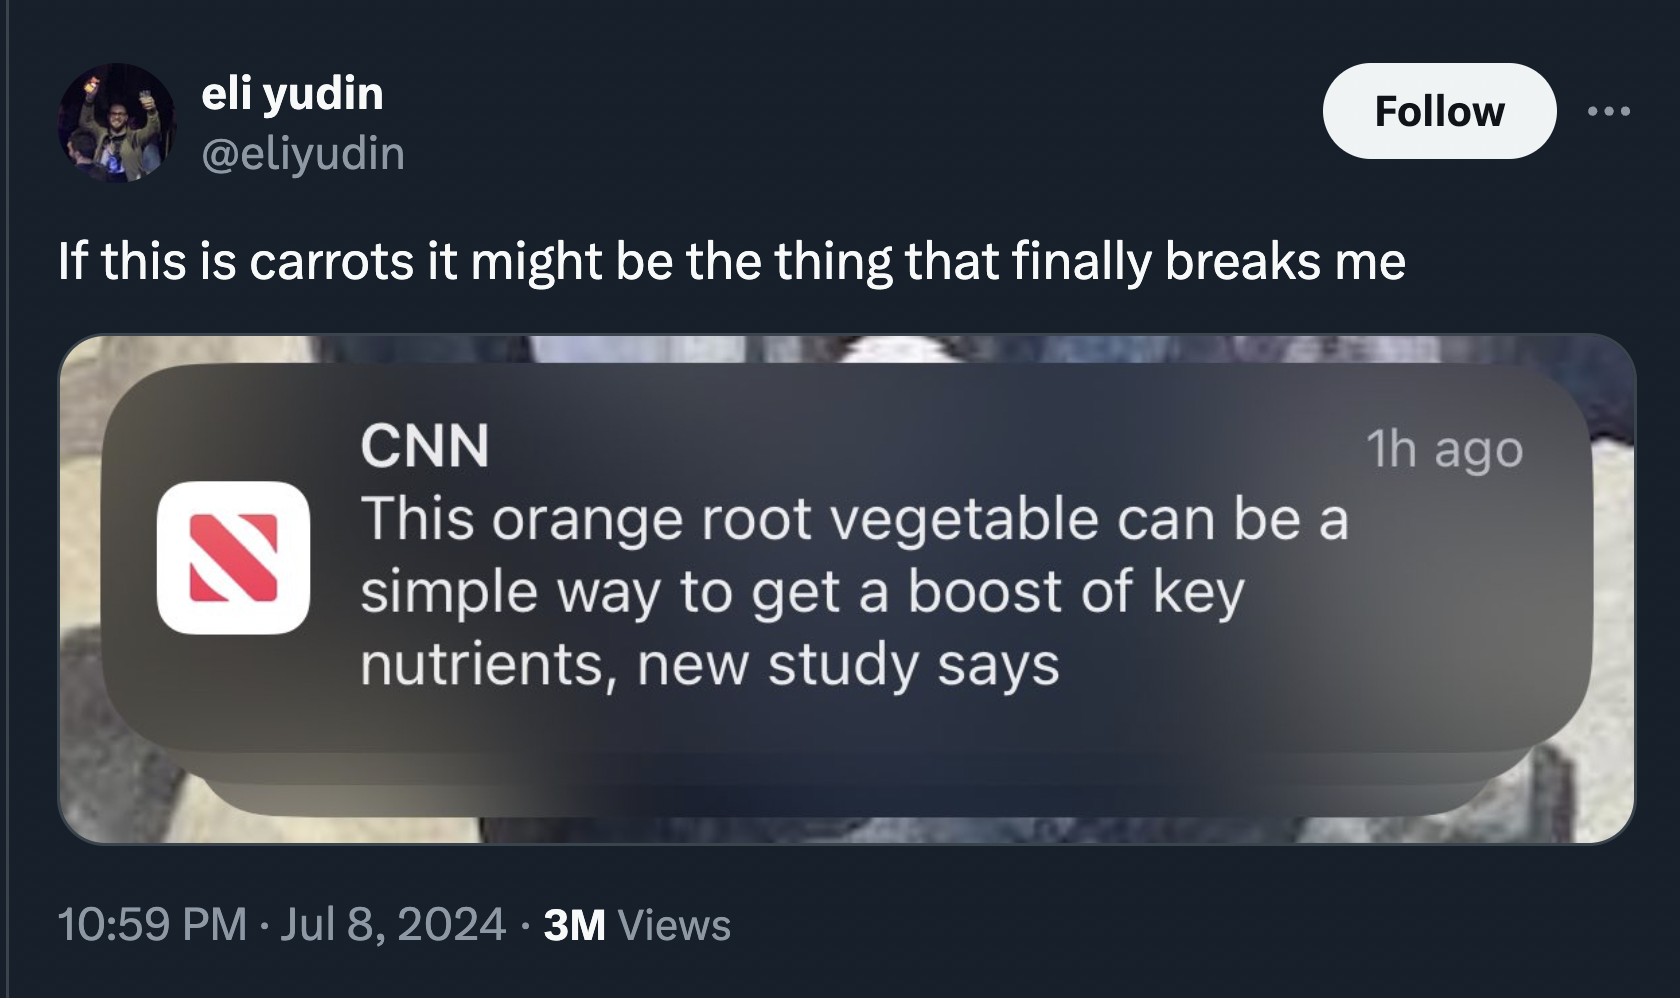 screenshot - eli yudin If this is carrots it might be the thing that finally breaks me Cnn This orange root vegetable can be a simple way to get a boost of key nutrients, new study says 1h ago . 3M Views